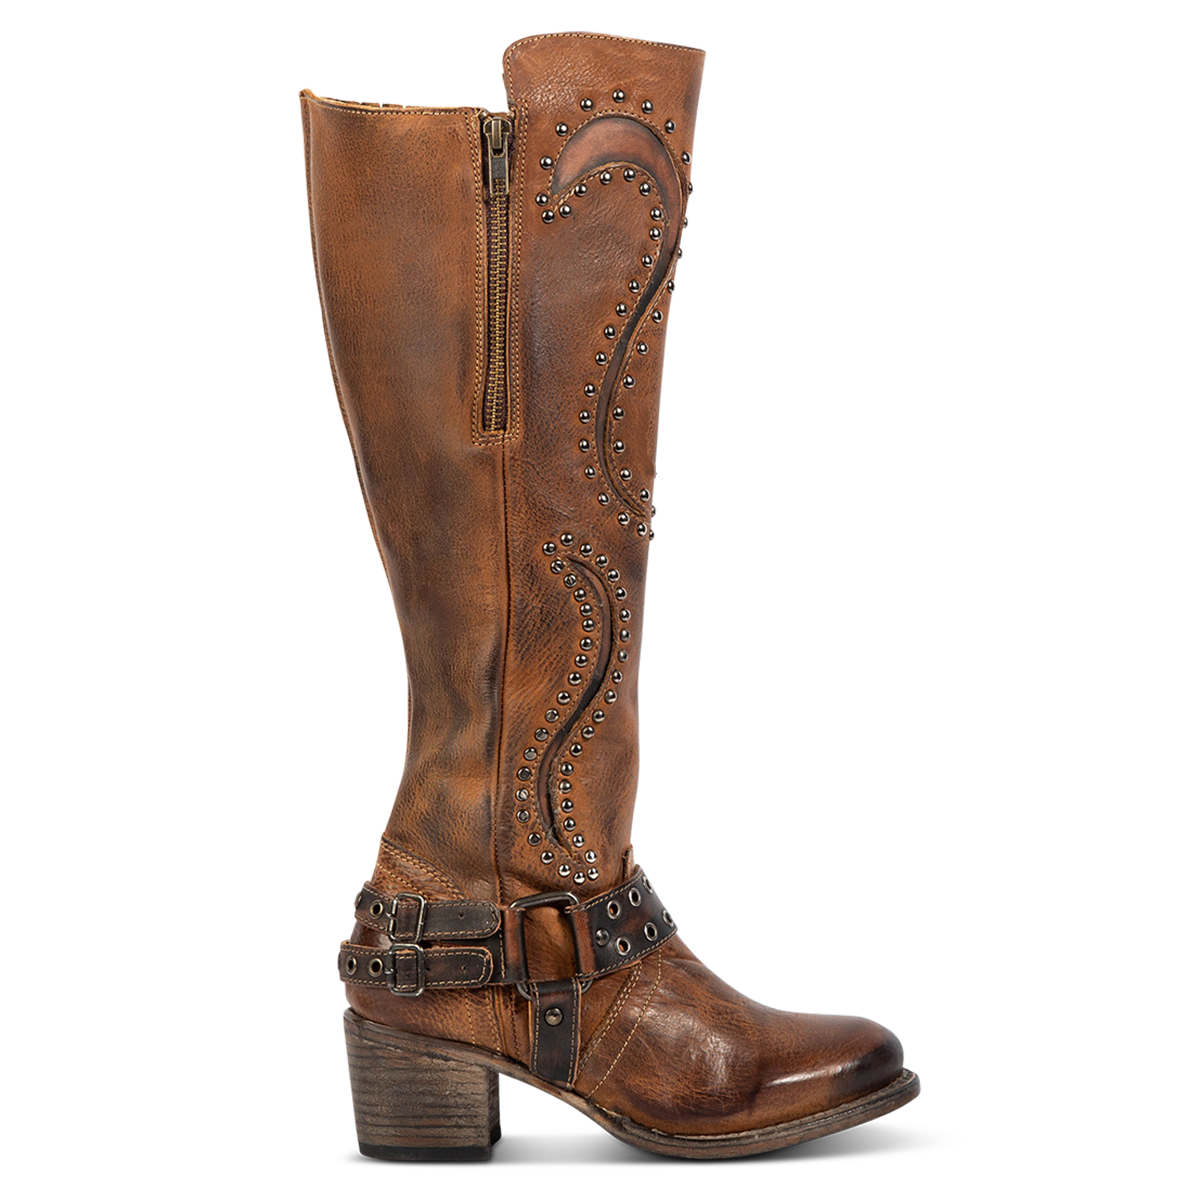 FREEBIRD women's Coyote brown leather knee high boot with studs and abstract stitching, block heel and eyelet ankle harness